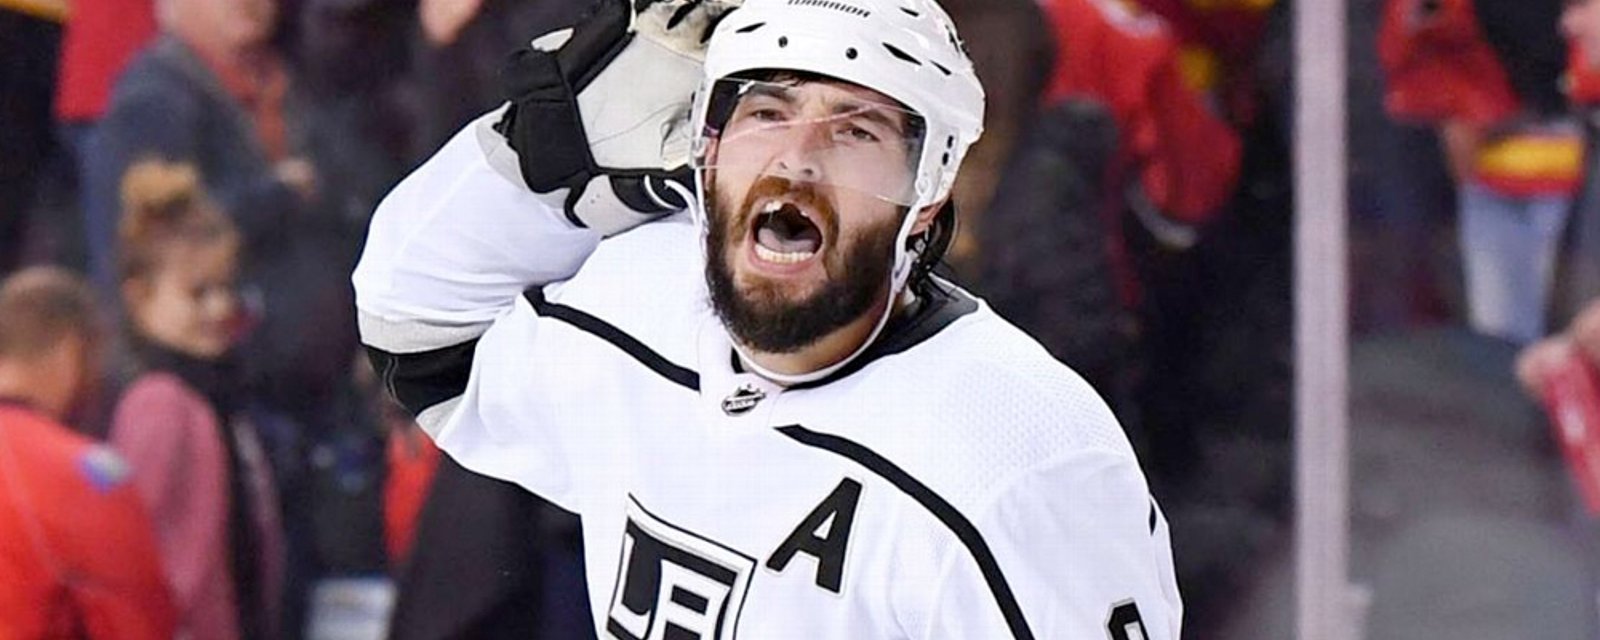 Doughty: “I don't see how this season is going to return.”